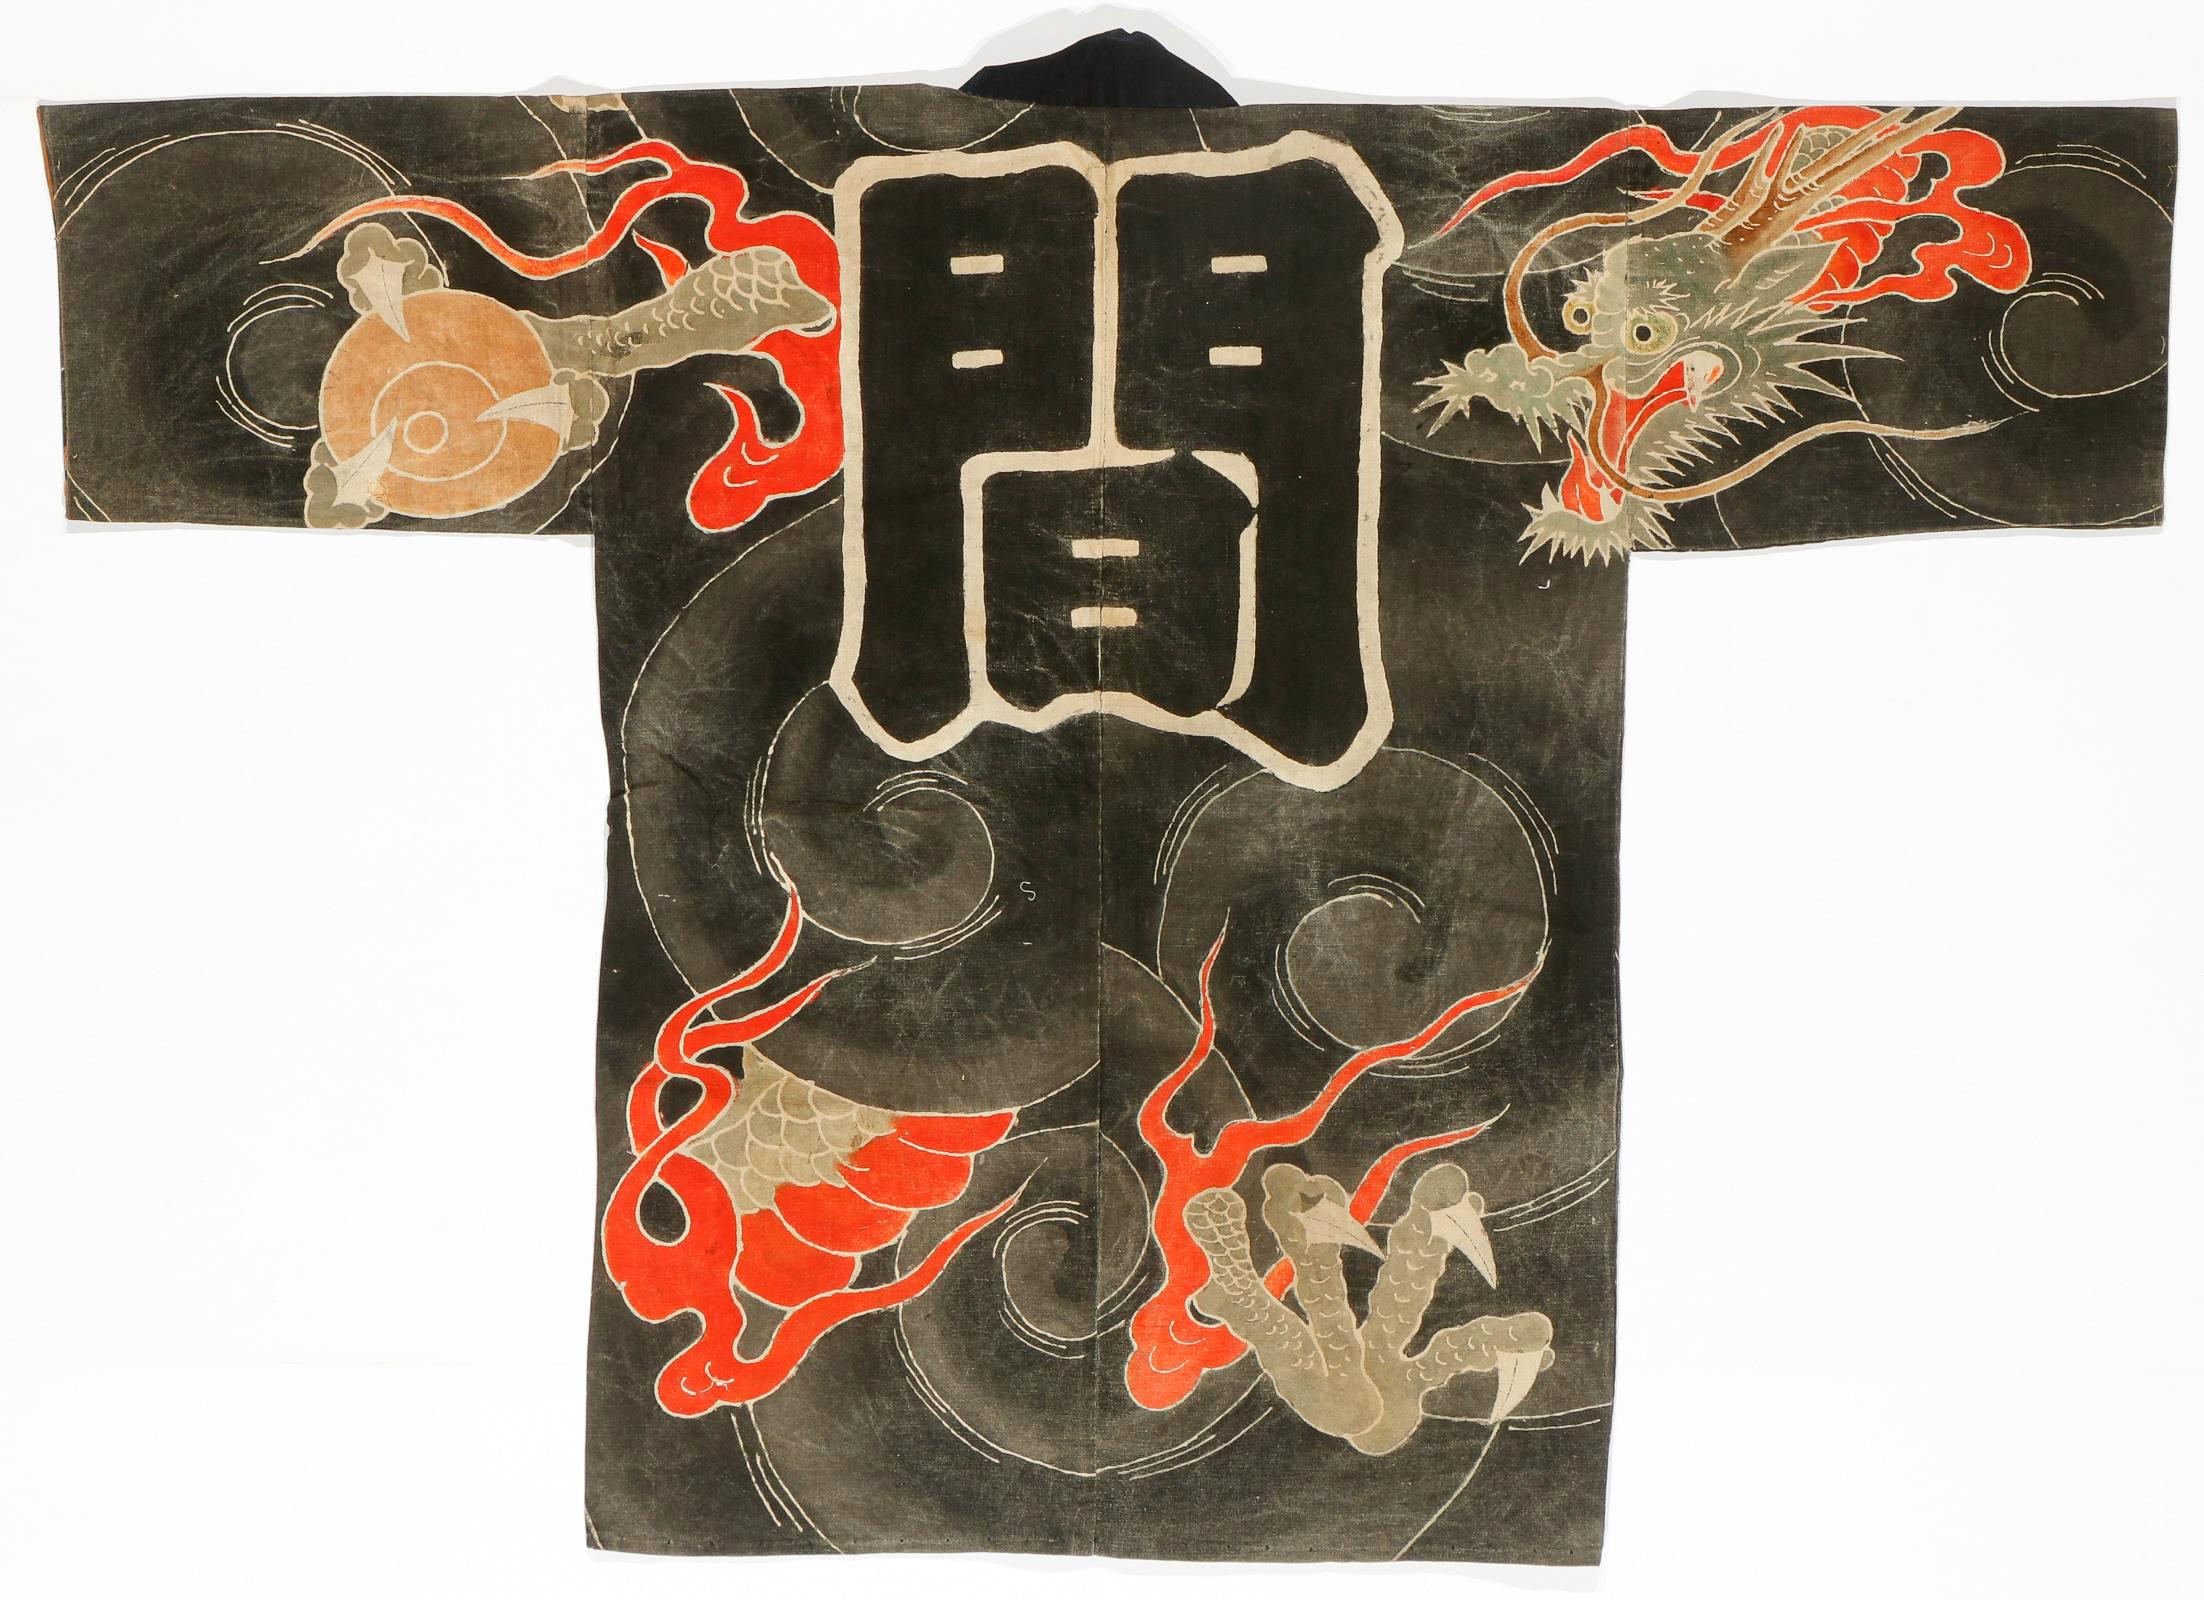 A Japanese Shirushi-Banten (Fireman's Coat) circa 19th century of Edo Period. The robe was made from a heavy cotton fiber and decorated with a dramatic dragon in the dark cloud scheme using Tsutsugaki, a free-hand resist dye method. A dragon with